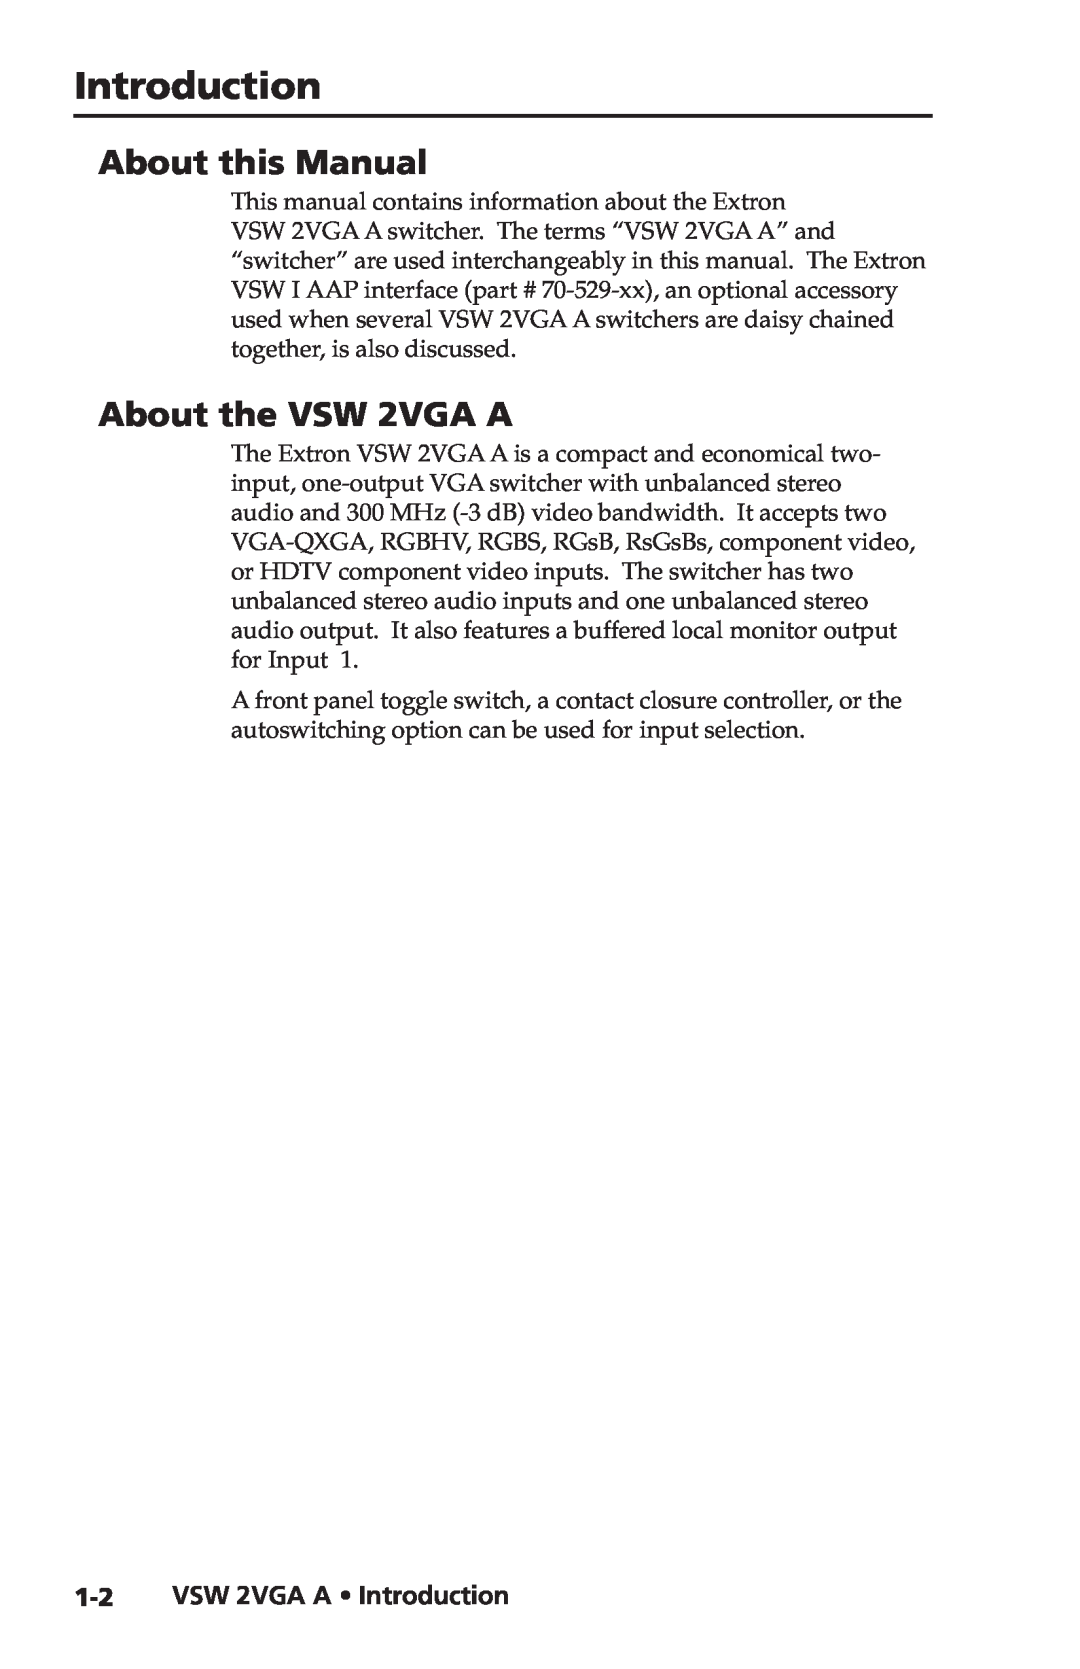 Extron electronic user manual About this Manual, About the VSW 2VGA A, VSW 2VGA A Introduction 